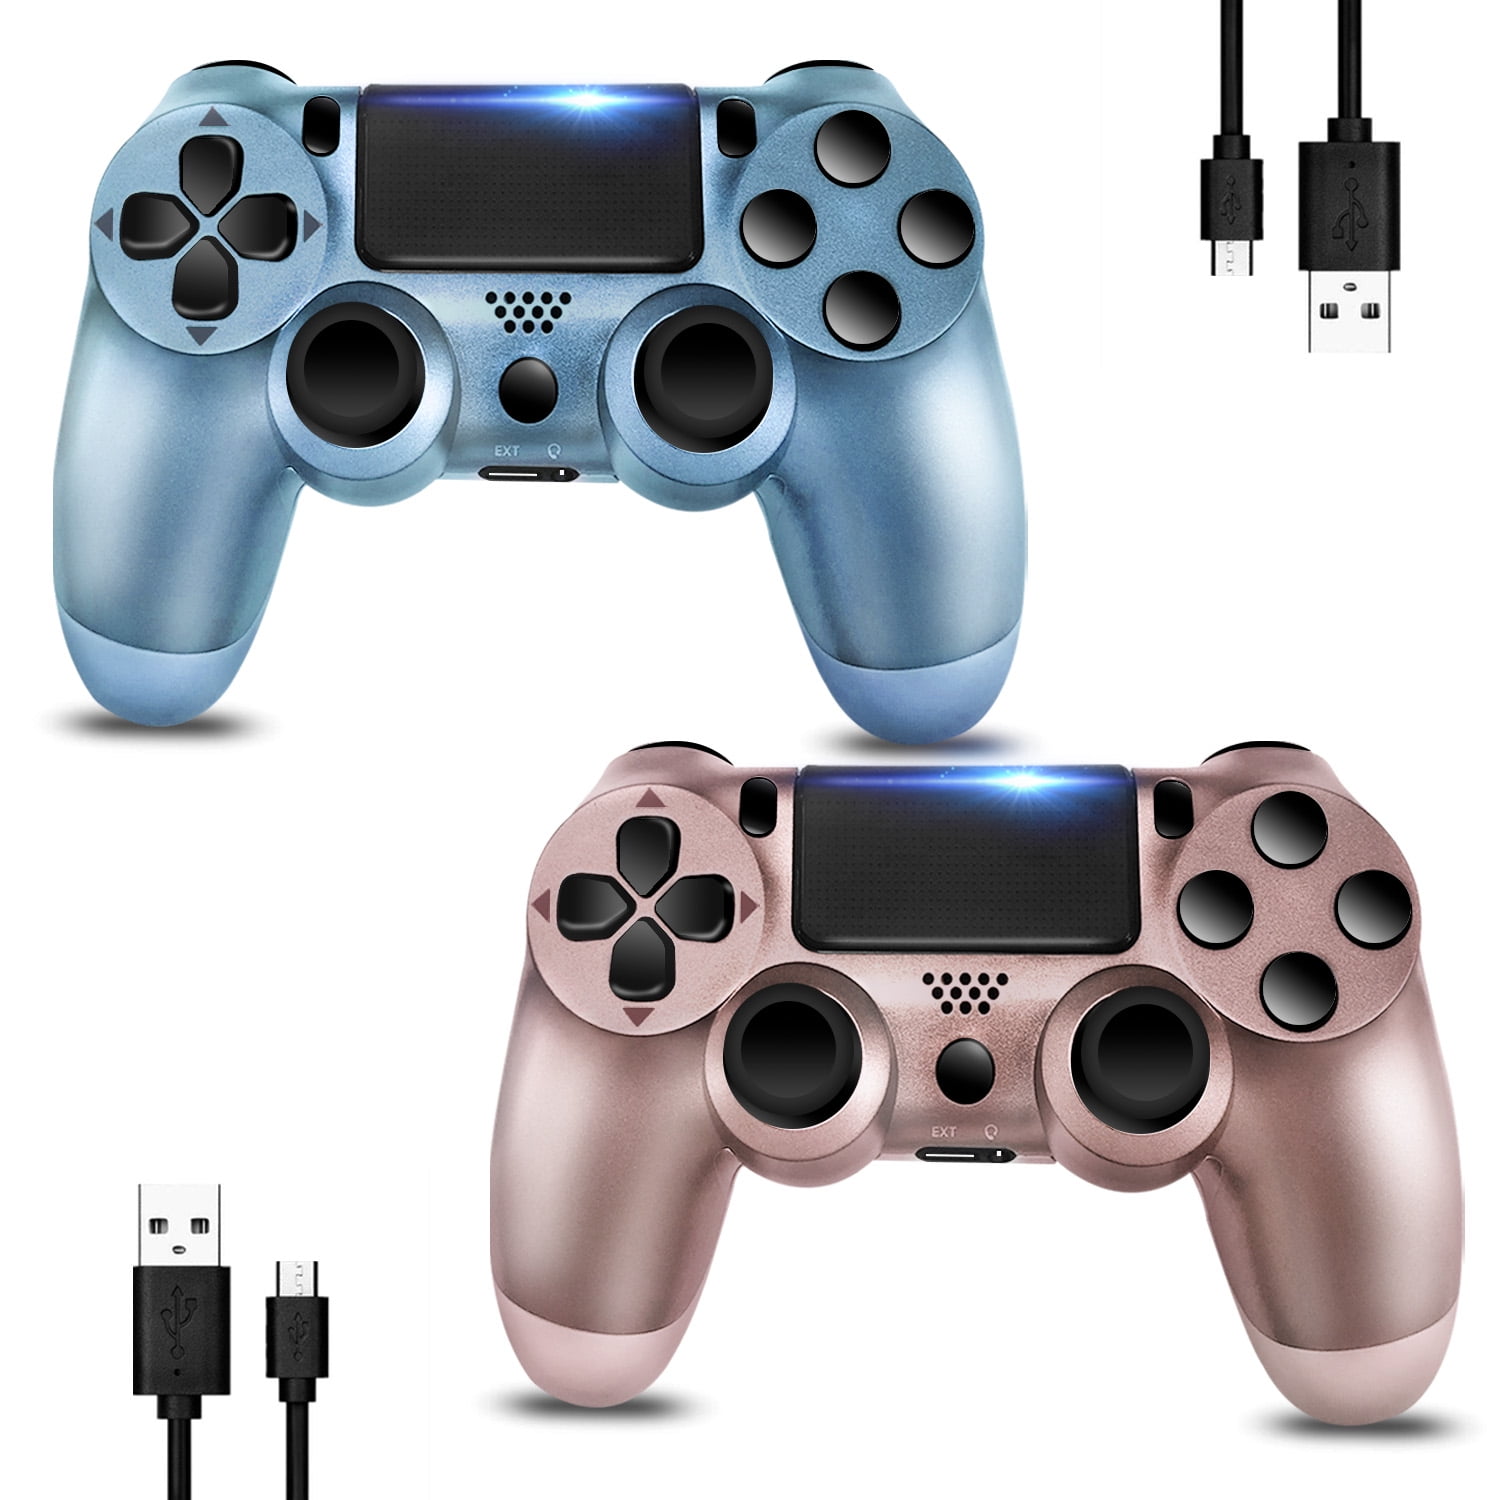  Sony Dualshock 4 Wireless Controller for PlayStation 4 - Blue  Crystal - PlayStation 4 : Video Games